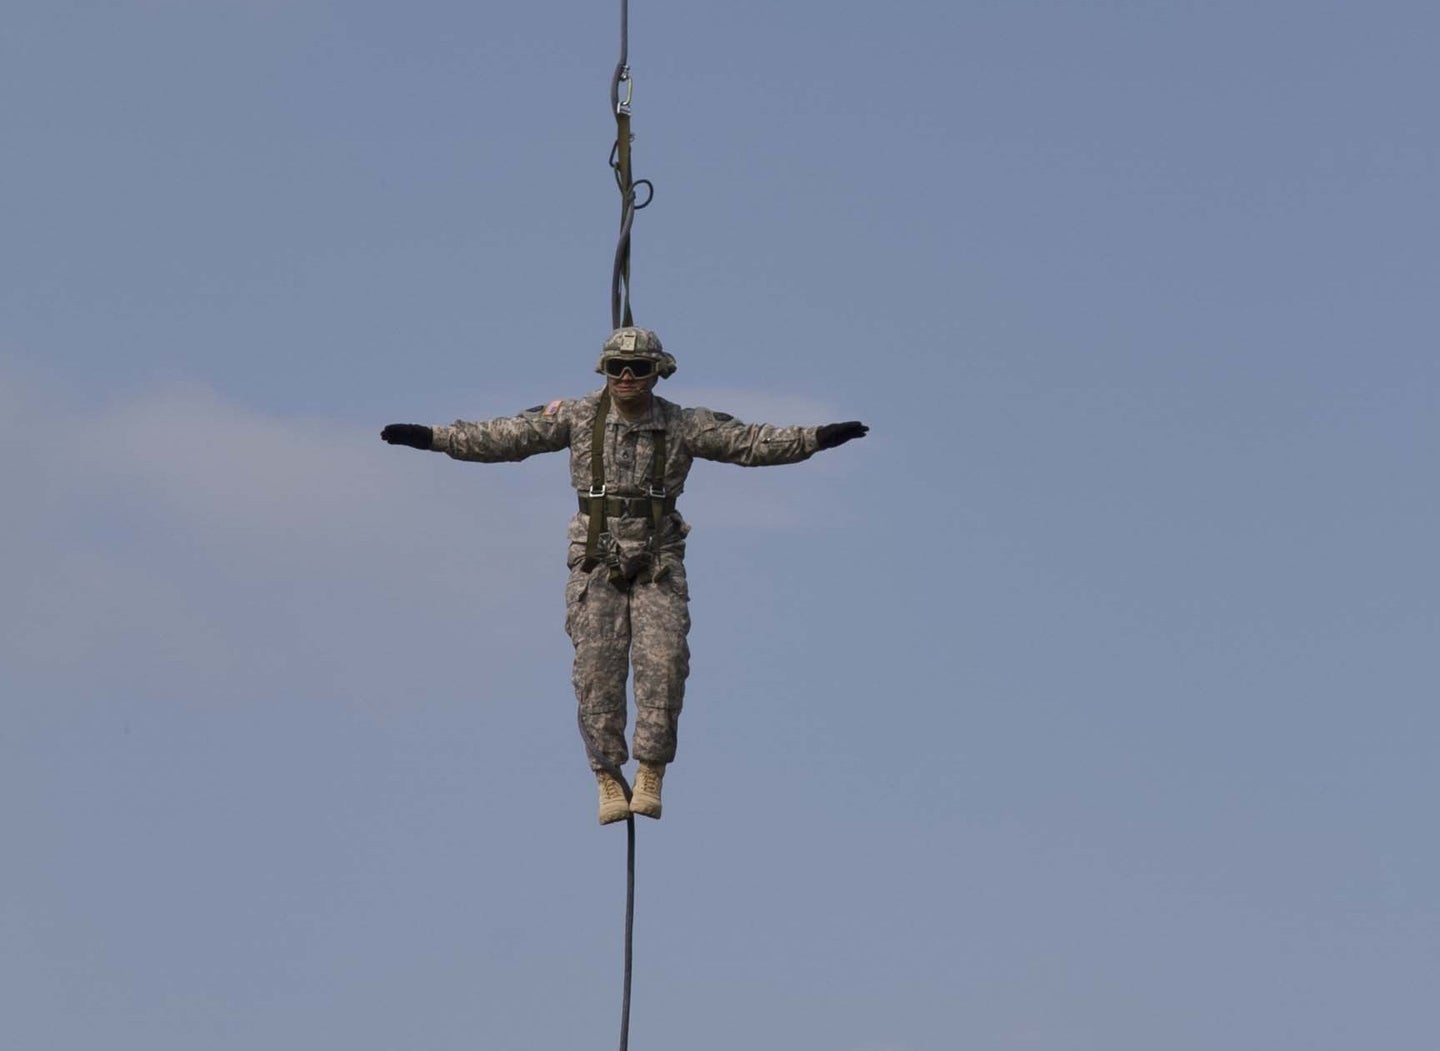 A soldier hanging from a helicopter in 2014 in Kosovo.